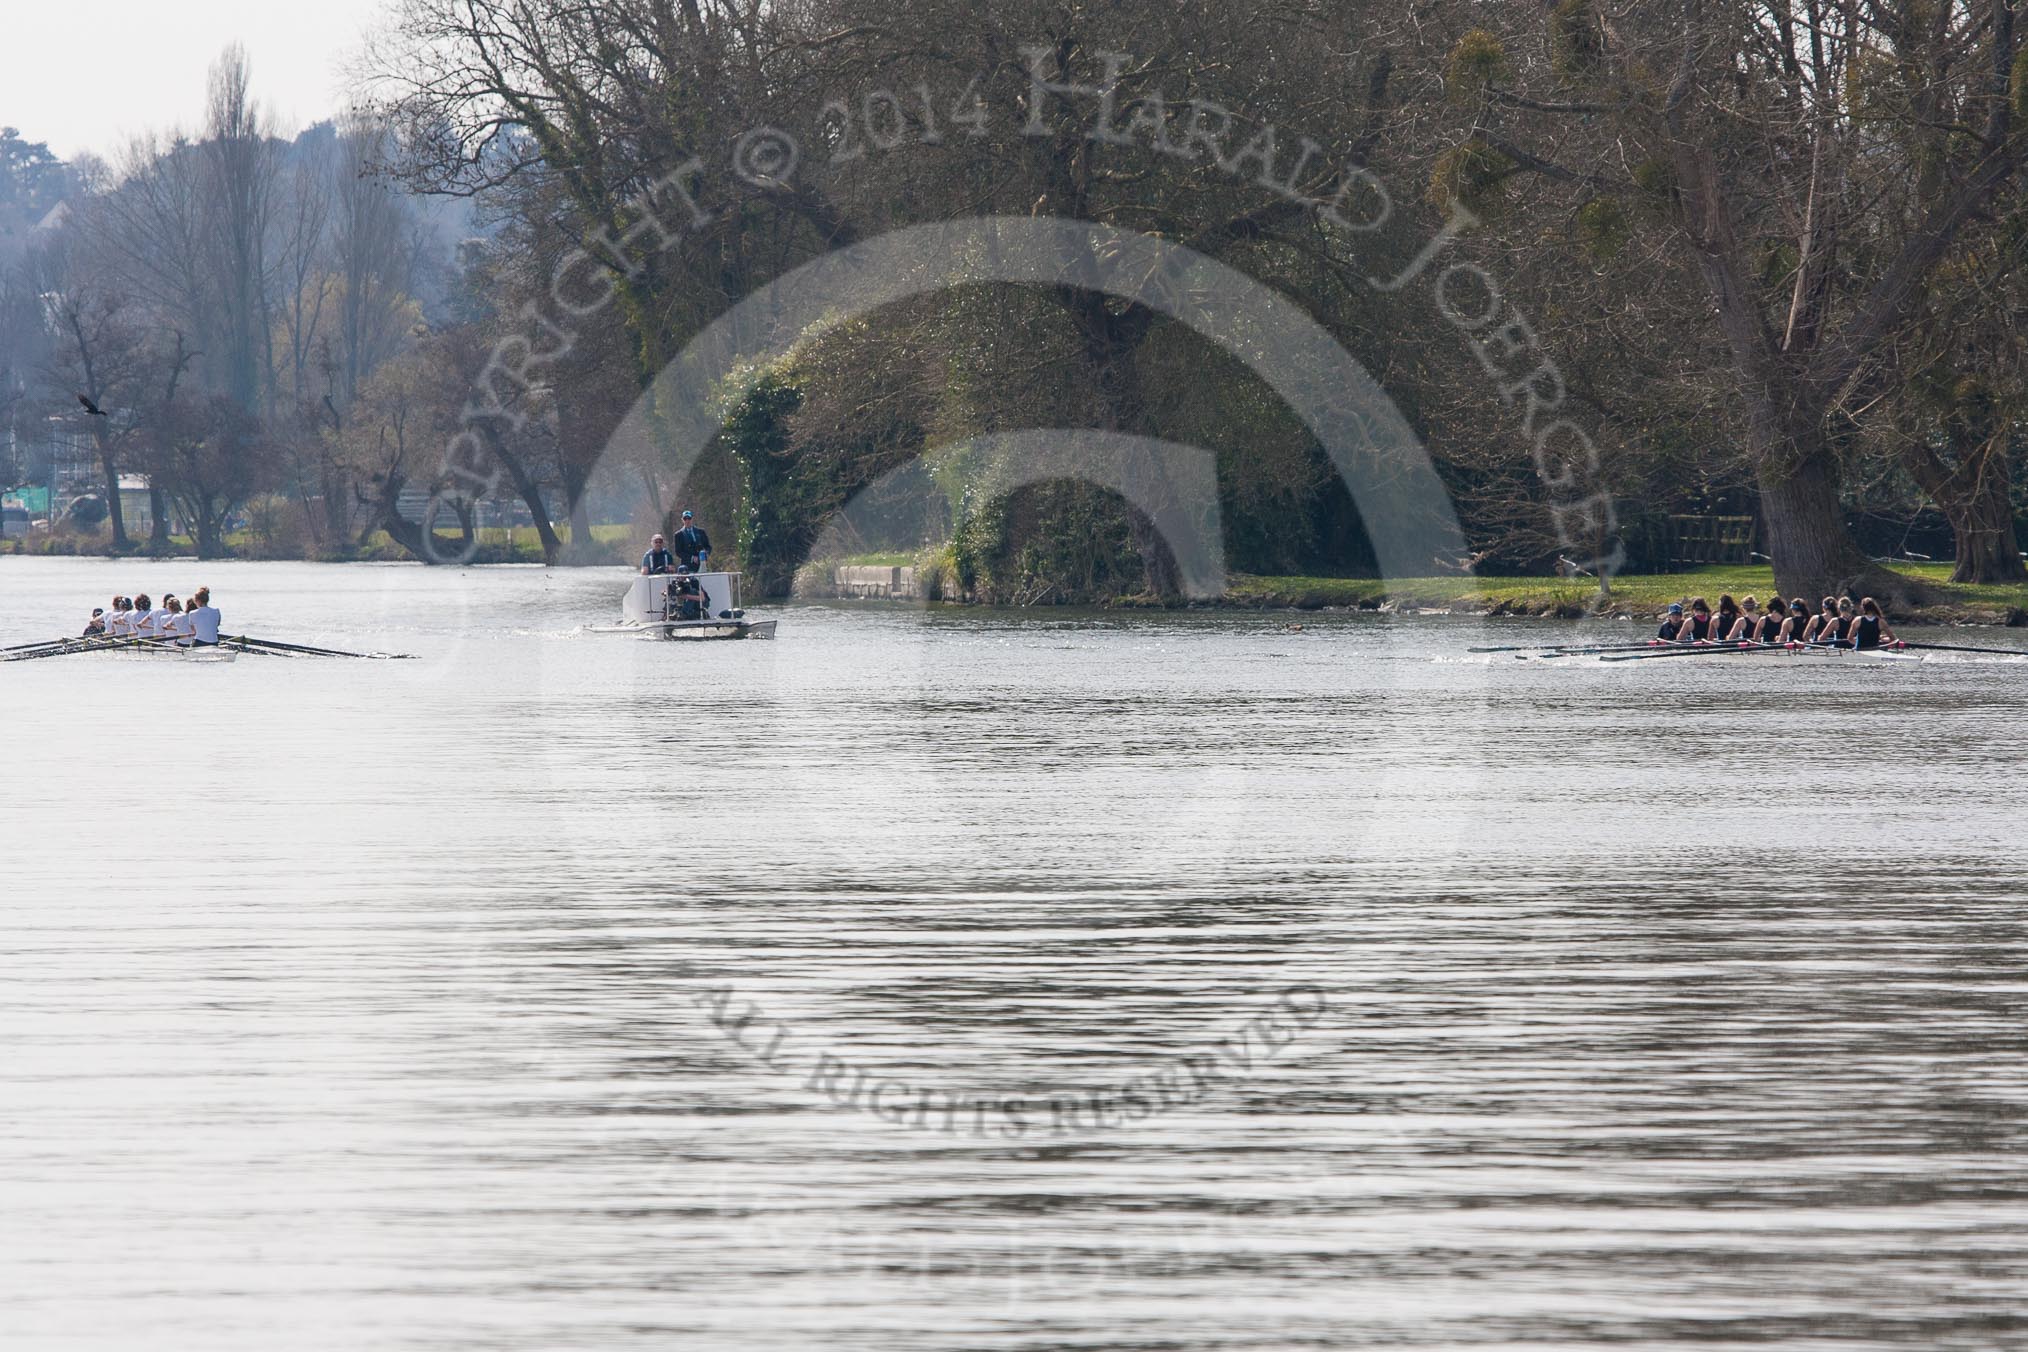 The Women's Boat Race and Henley Boat Races 2014: The Intercollegiate women's race. The Wadham College (Oxford) boat is on the right, Trinity College (Cambridge) on the left..
River Thames,
Henley-on-Thames,
Buckinghamshire,
United Kingdom,
on 30 March 2014 at 13:26, image #9